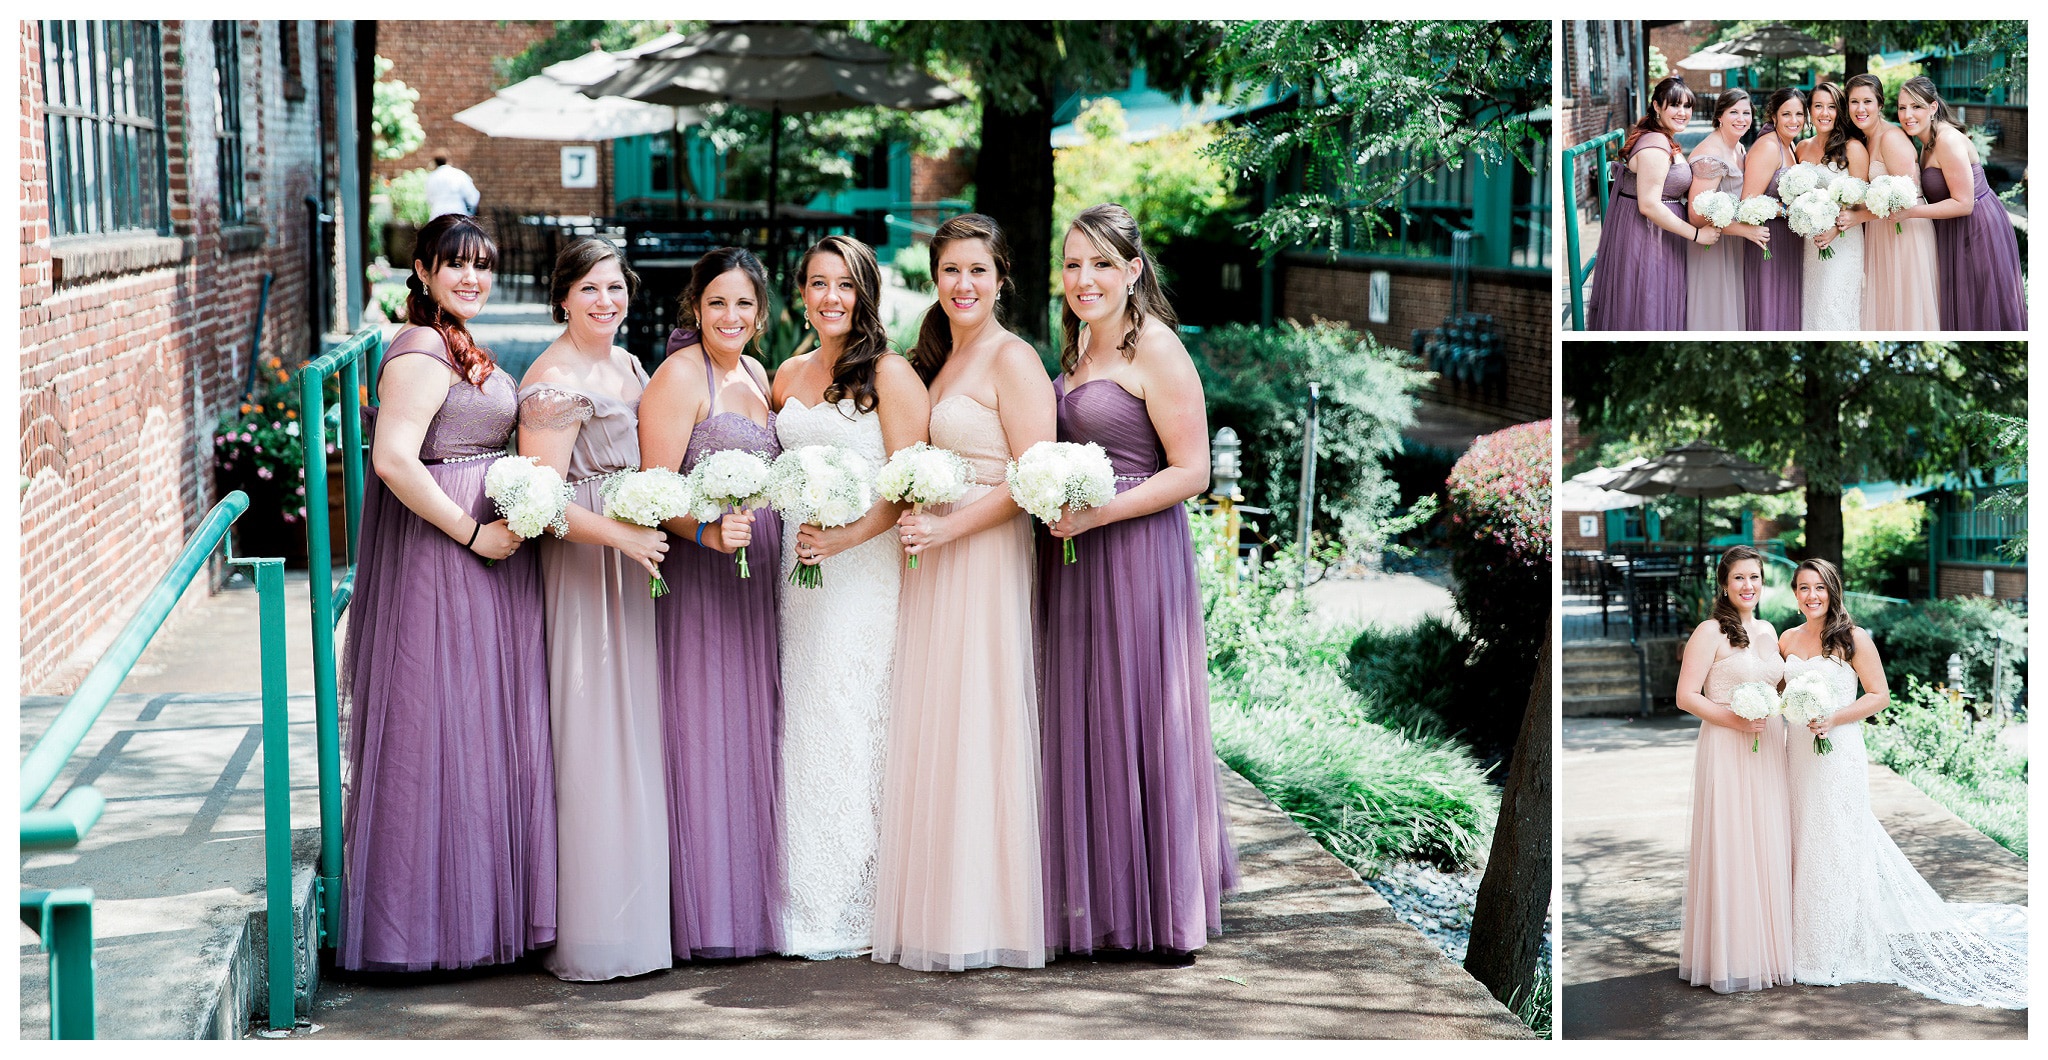 Gorgeous Ladies - The Bride and Bridesmaids with bouquets,  Venue and Catering – King plow Event Gallery and Bold American Events Decor and flowers – Stylish Stems Music and Band – Seven Sharp Nine Transportation – Georgia Trolley Photographer One Life Photography